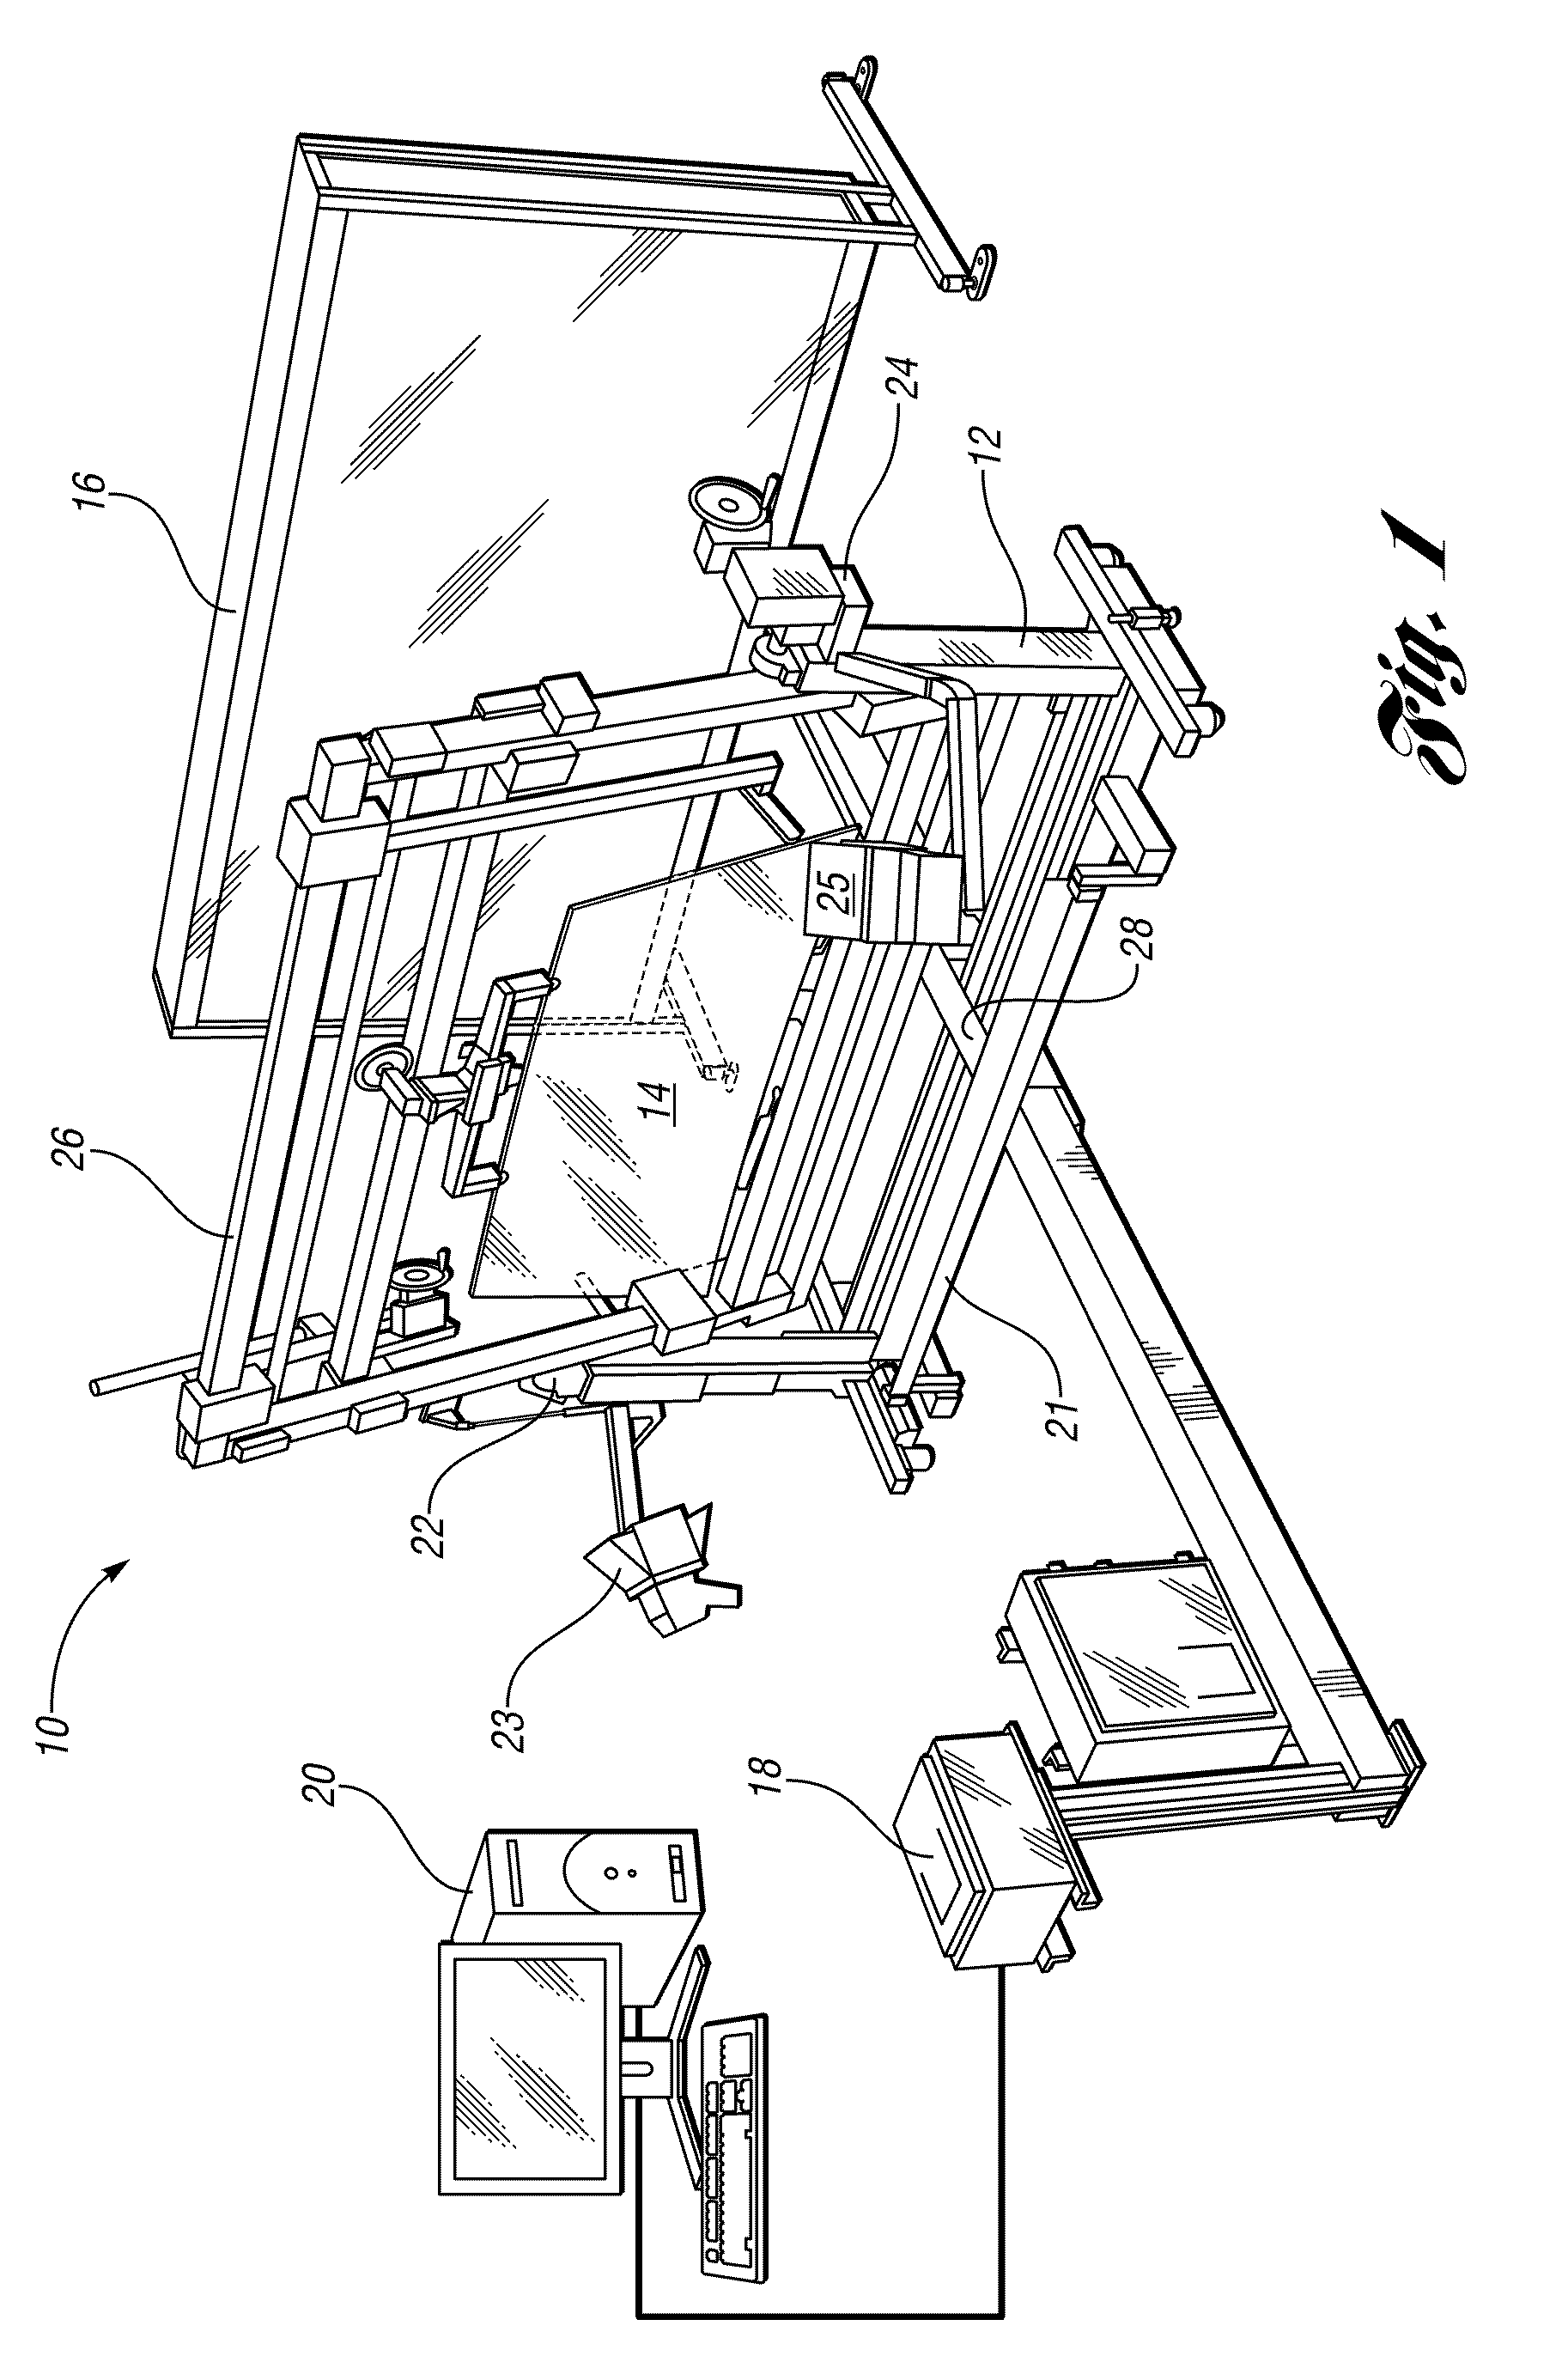 Method and apparatus for measuring transmitted optical distortion in glass sheets